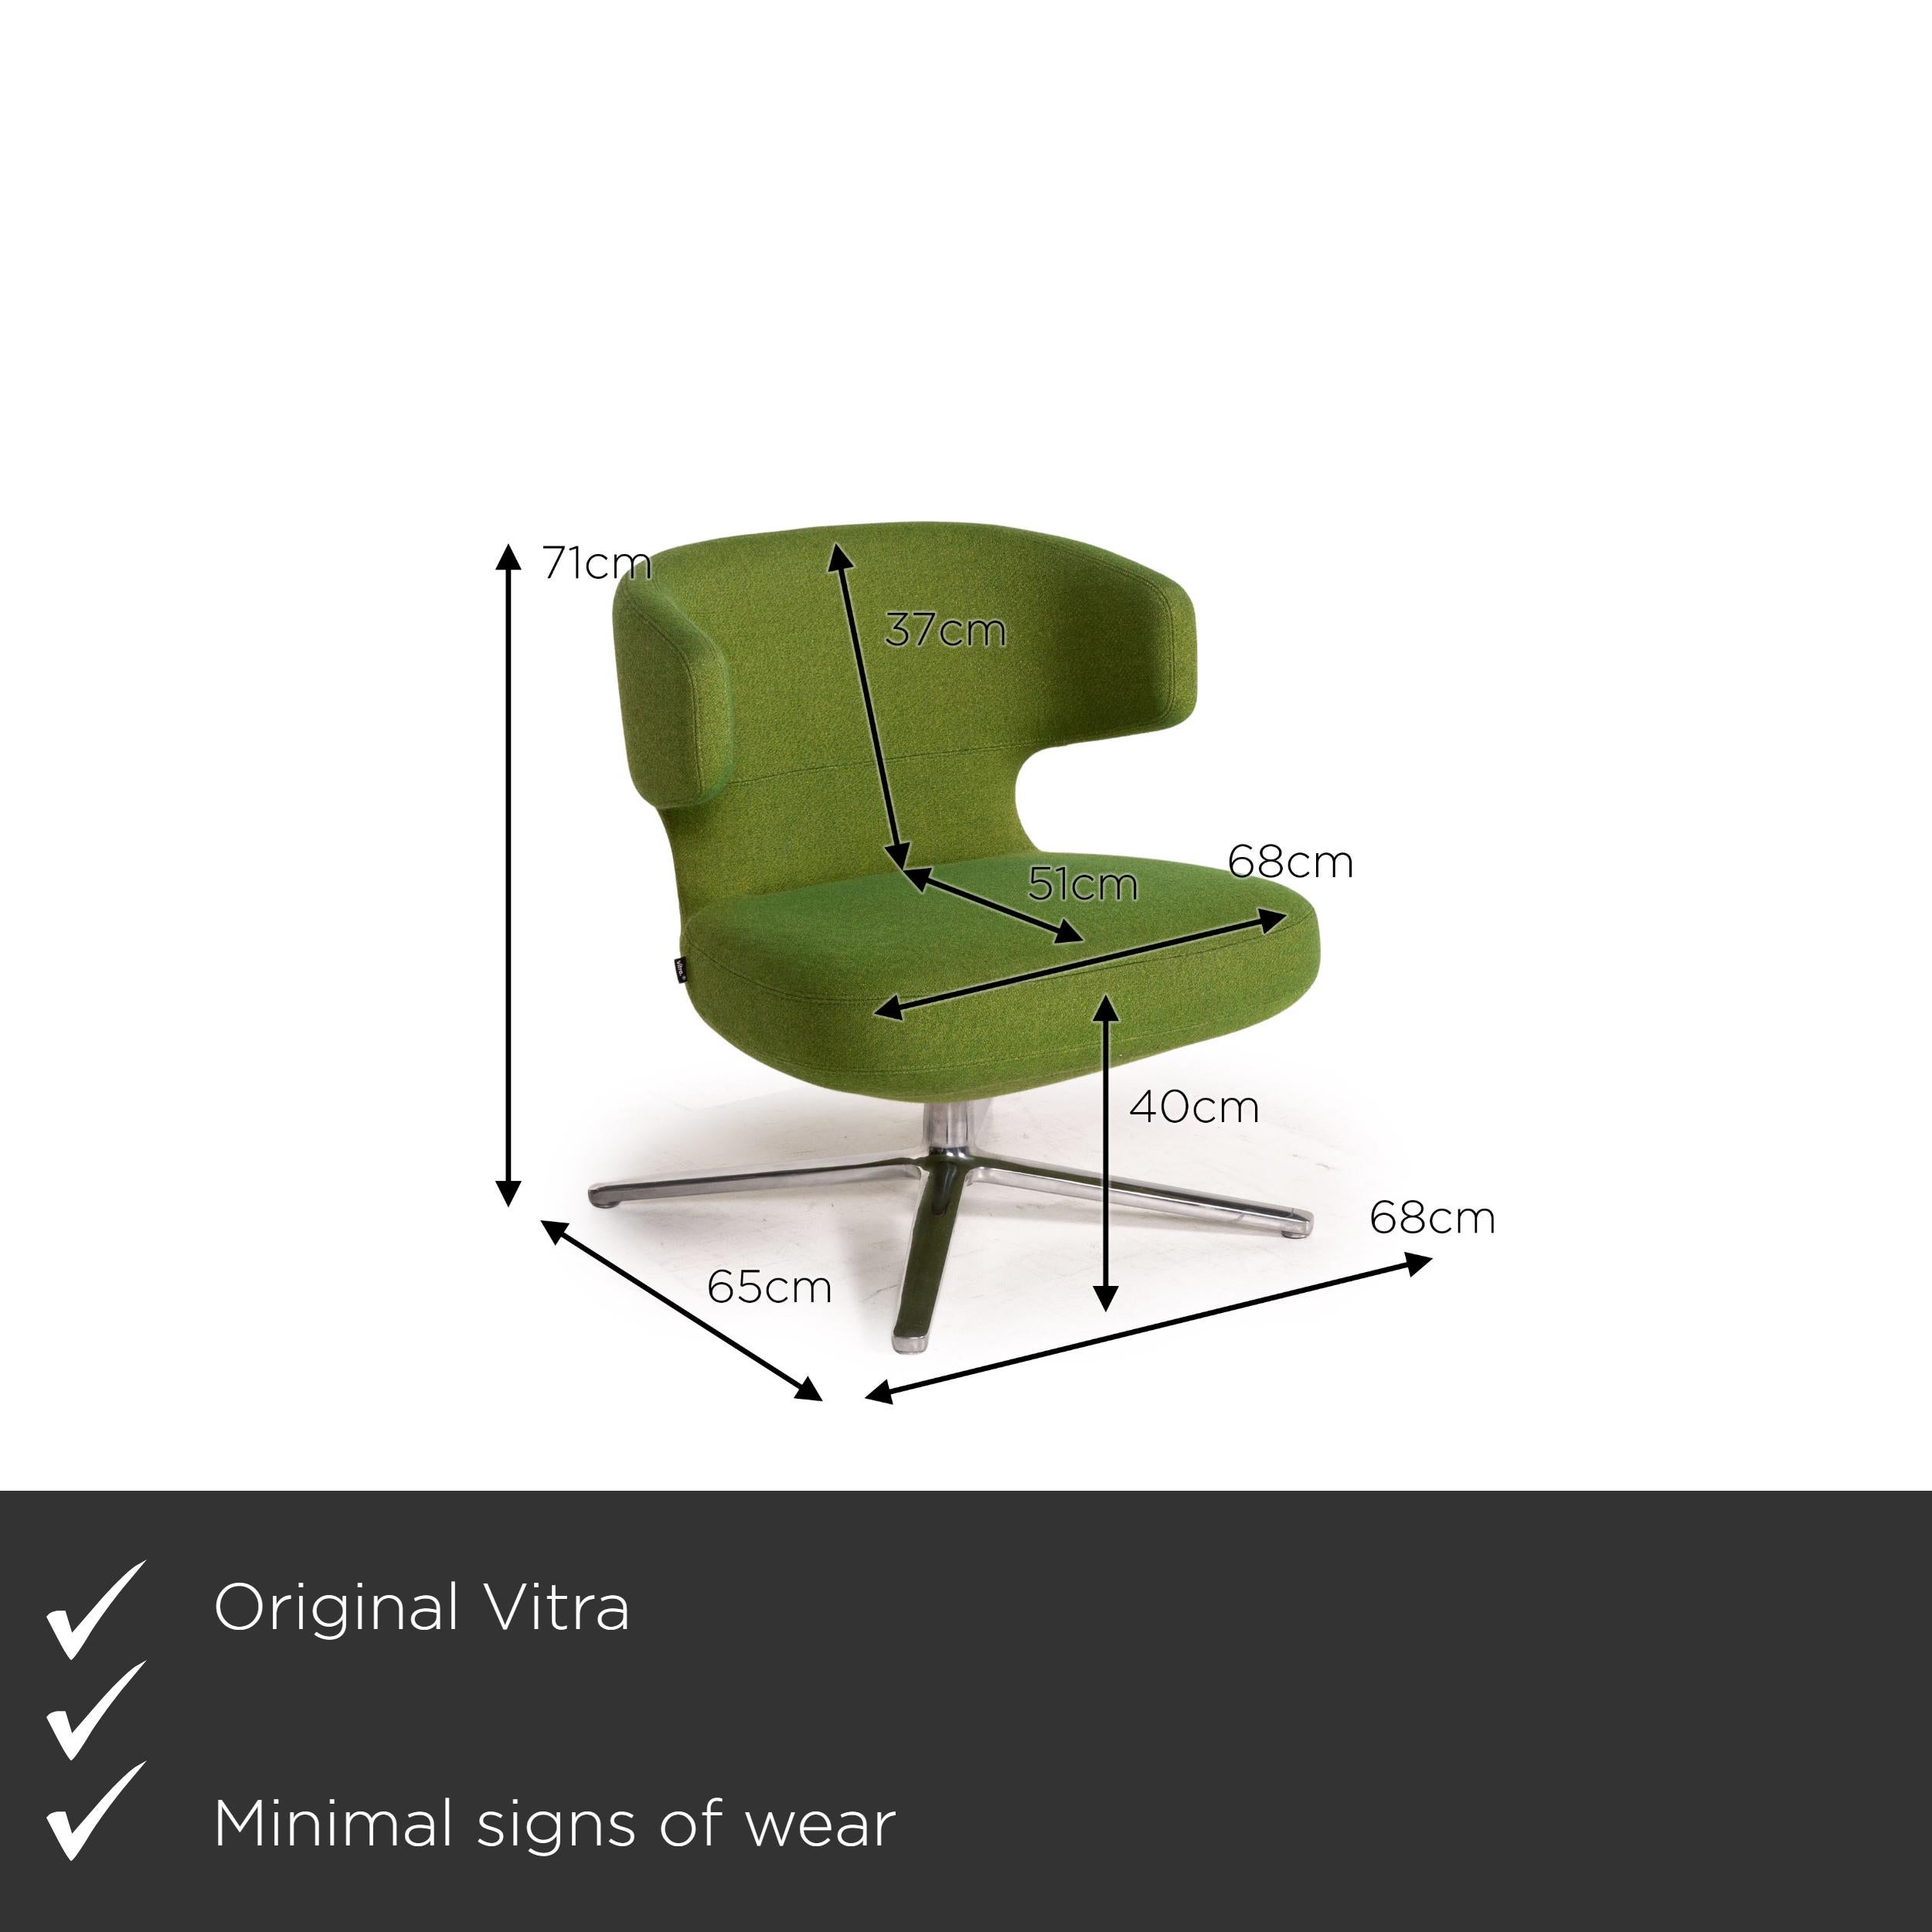 We present to you a Vitra Petit Repos green armchair fabric.


 Product measurements in centimeters:
 

Depth: 65
Width: 68
Height: 71
Seat height: 40
Rest height: 66
Seat depth: 51
Seat width: 68
Back height: 37.
 